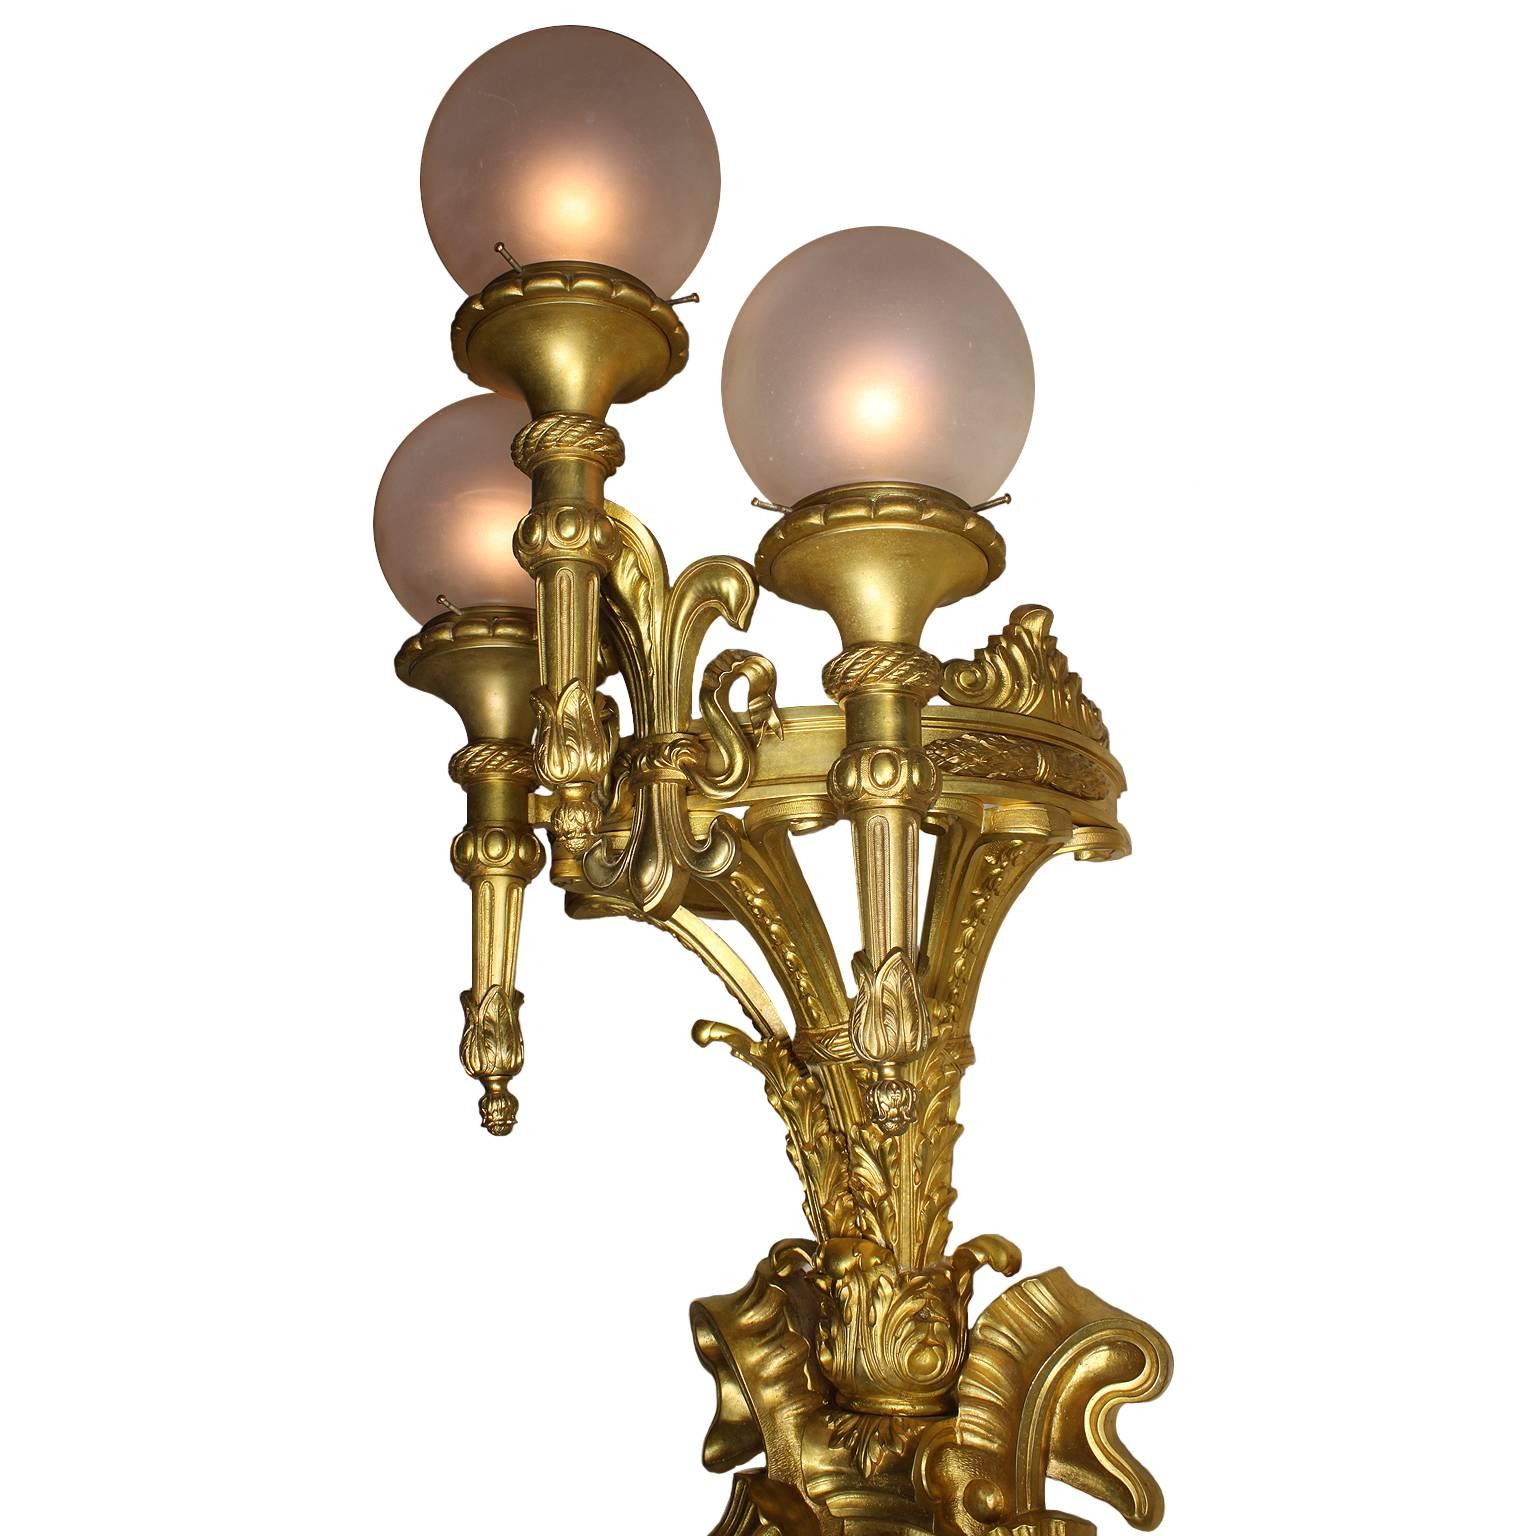 A very fine and palatial French Belle Époque, 19th-20th century gilt-nronze three-light wall light with frosted glass globes. The allegorical ribbon and laurel gilt-bronze shield centred with a monogram with the initials 